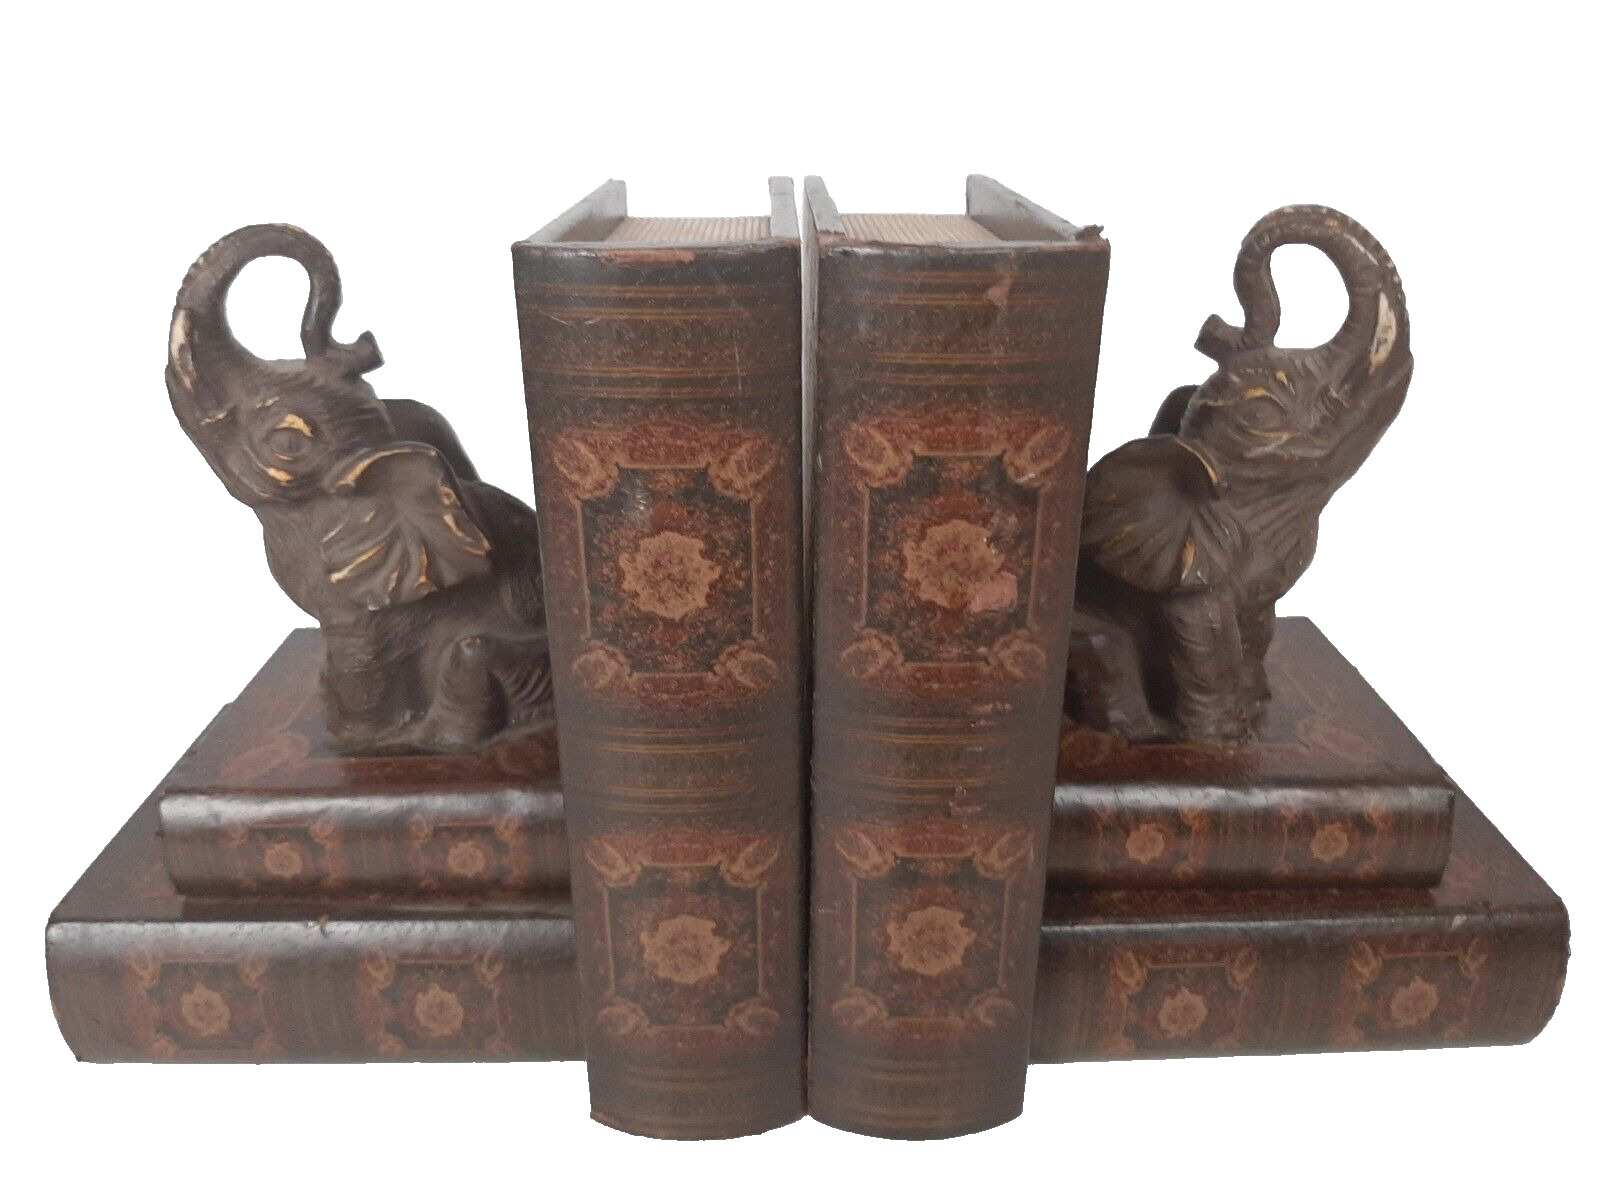 Pair of Vintage Carved Wood Elephants On Books Bookends Antique Old World Style